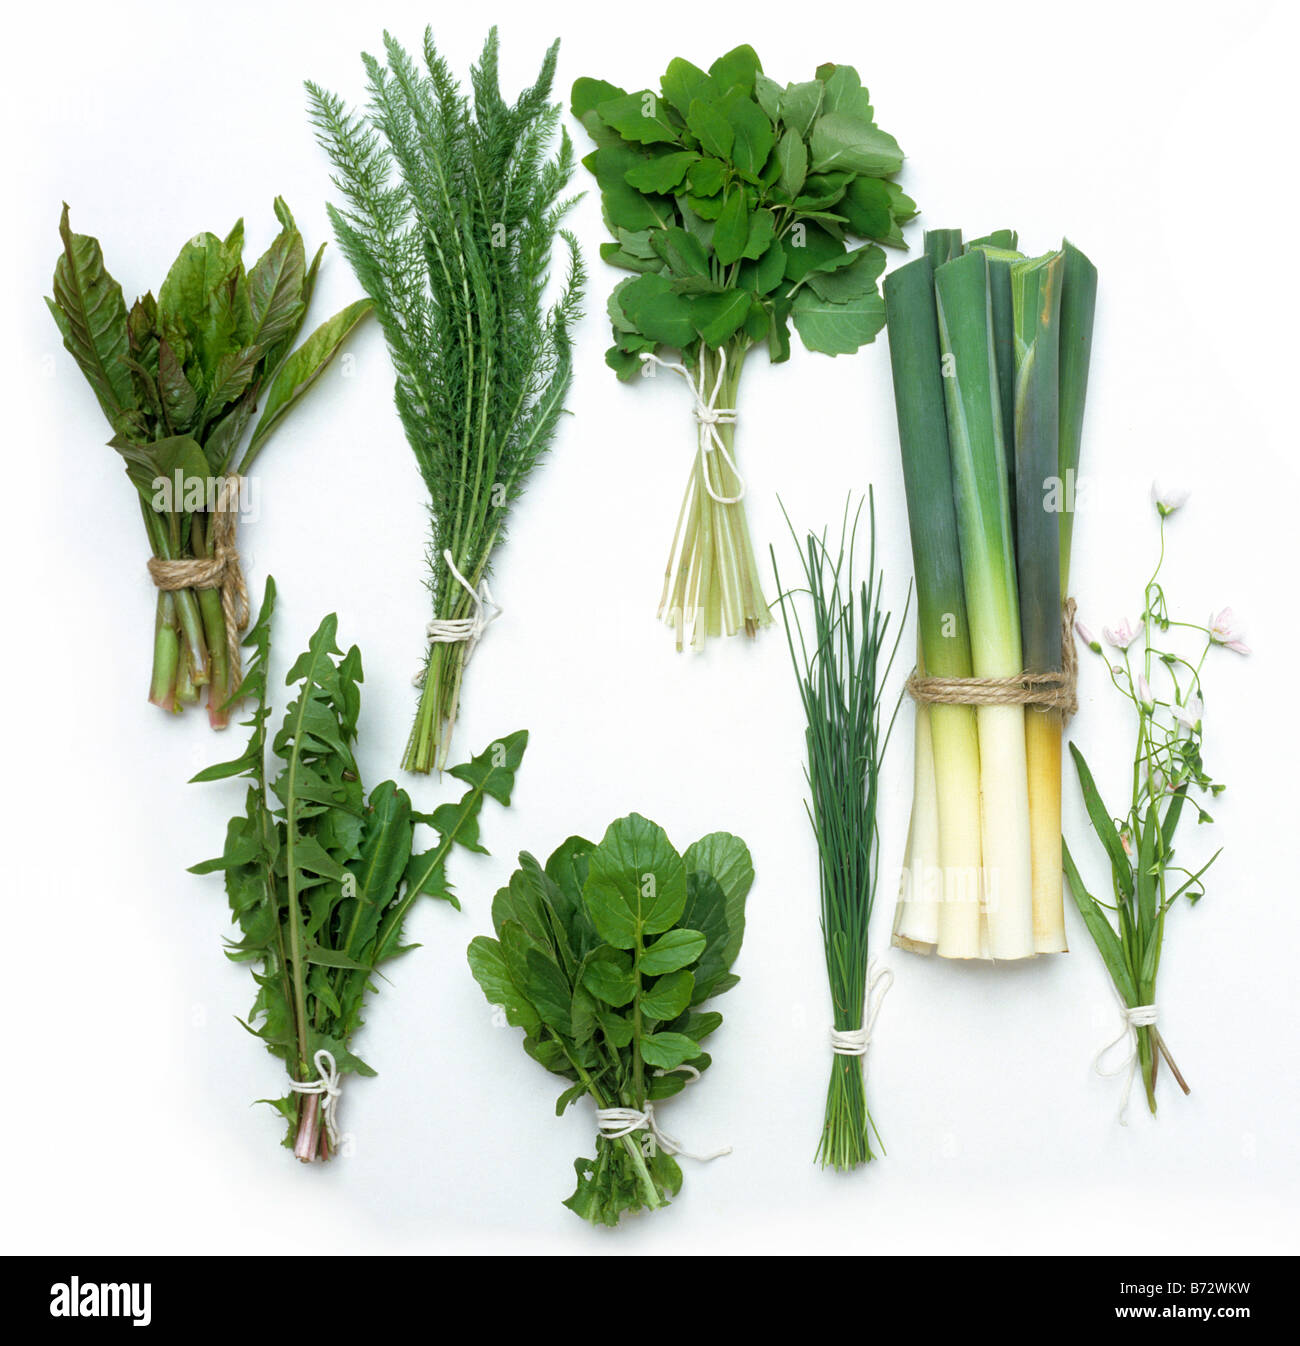 Bunches of wild herbs and edible leaves Stock Photo